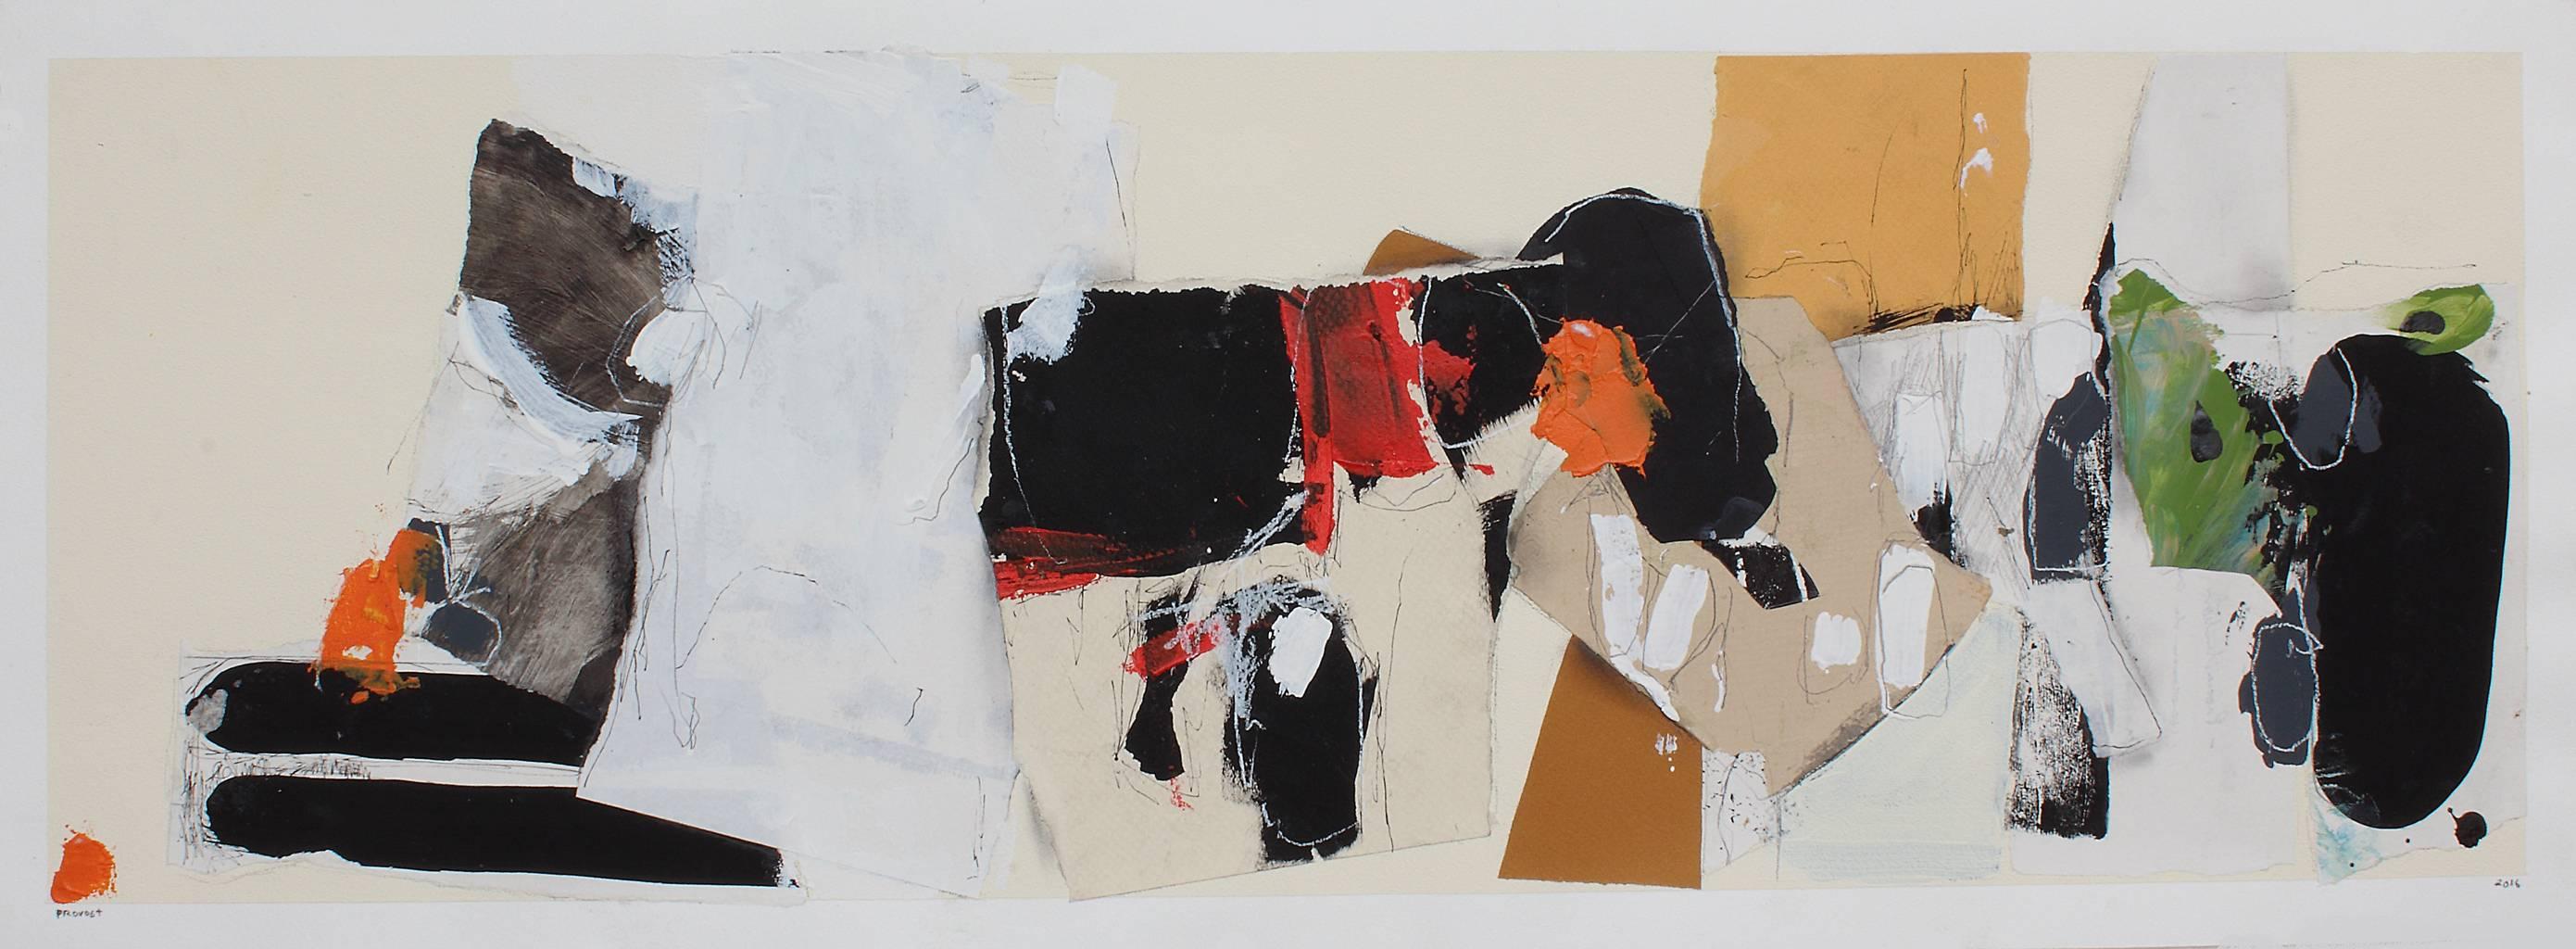 Jean-François Provost Abstract Painting - Sentier Du Marais 3, collaged mixed media painting on paper